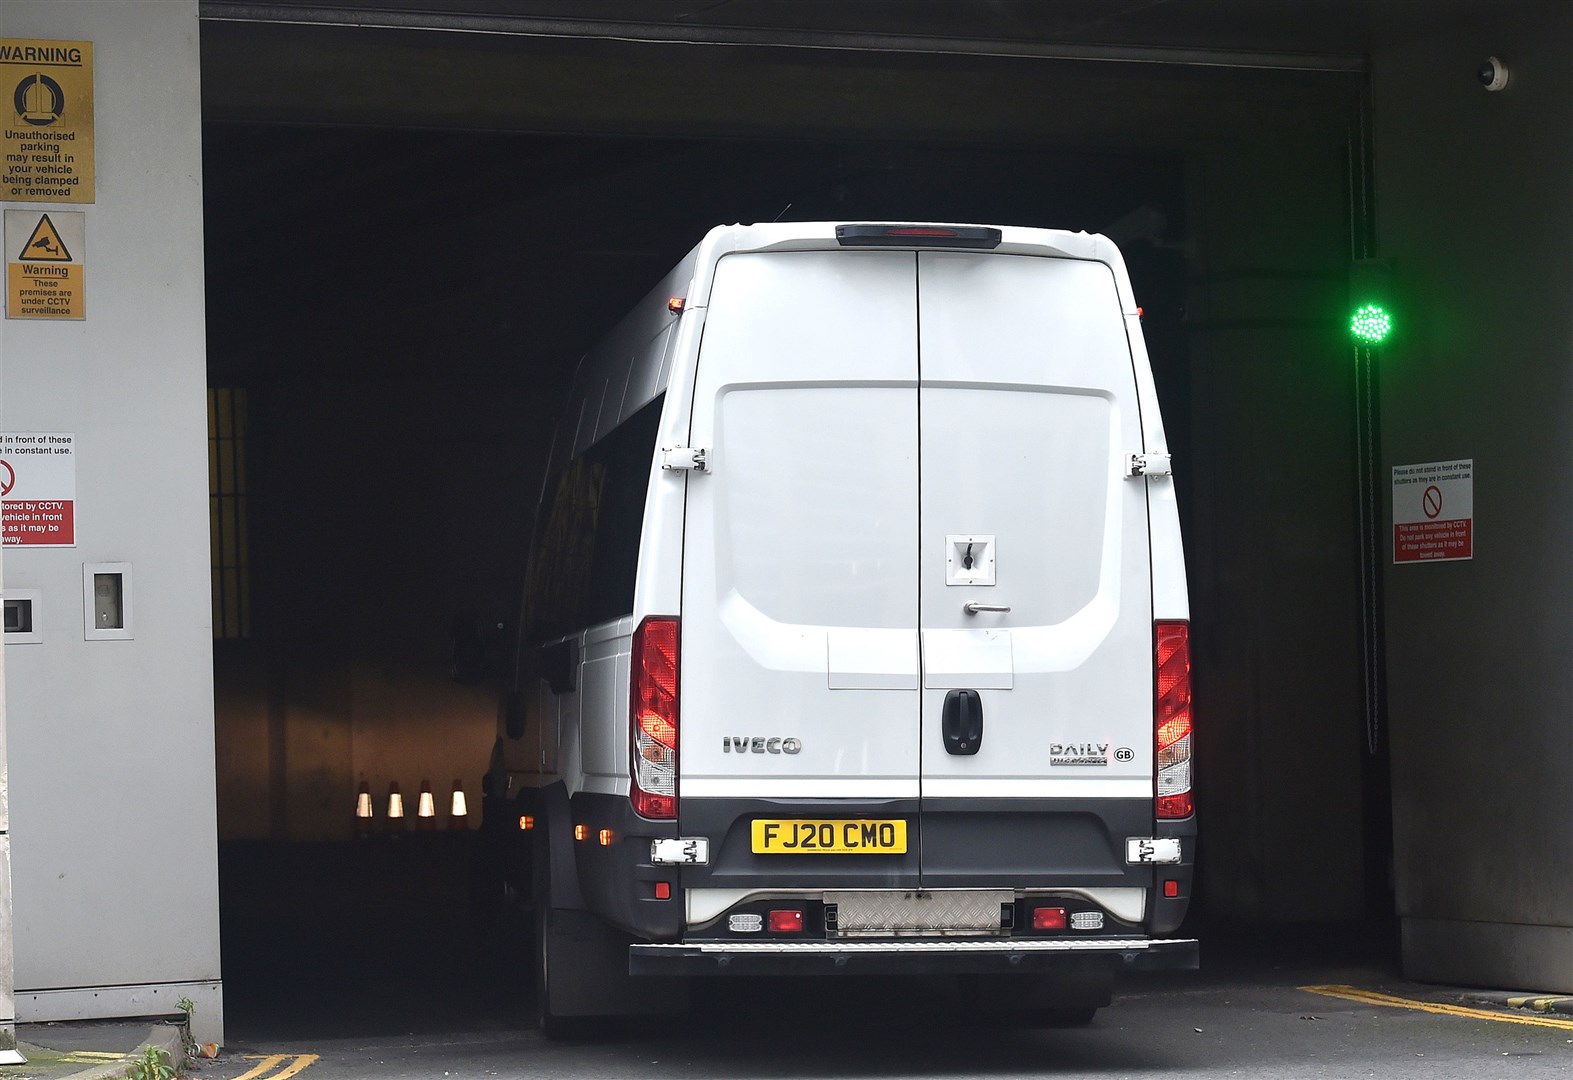 A prison van arrives at Manchester Crown Court, where the Lucy Letby murder trial is taking place (PA)